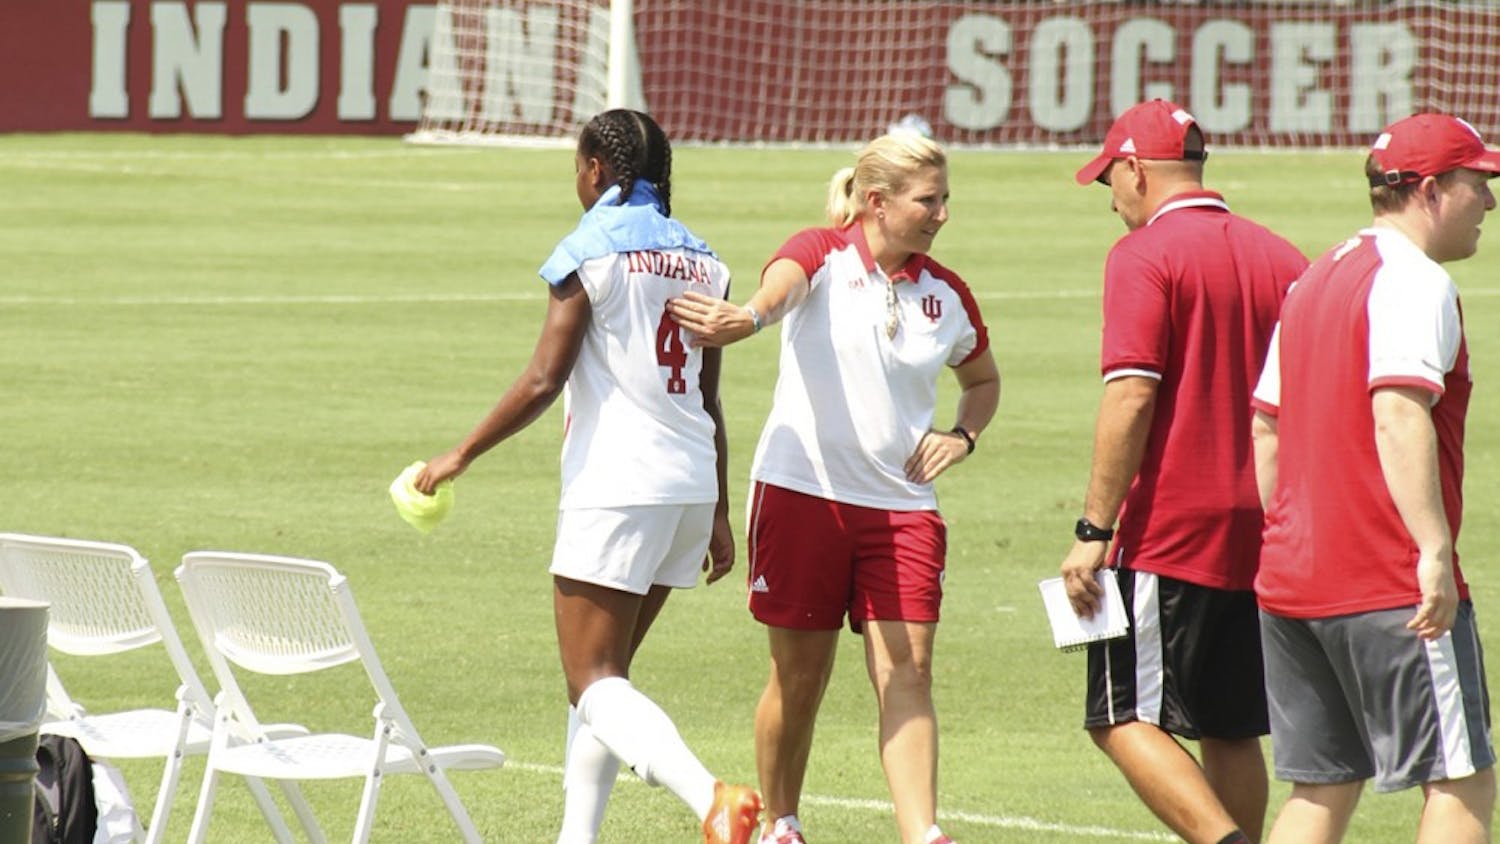 Former IU women's soccer Coach Amy Berbary pats Mykayla Brown on the back after a game Aug. 28, 2016 at Bill Armstrong Stadium. IU athletics announced Thursday that Berbary's contract would not be renewed.